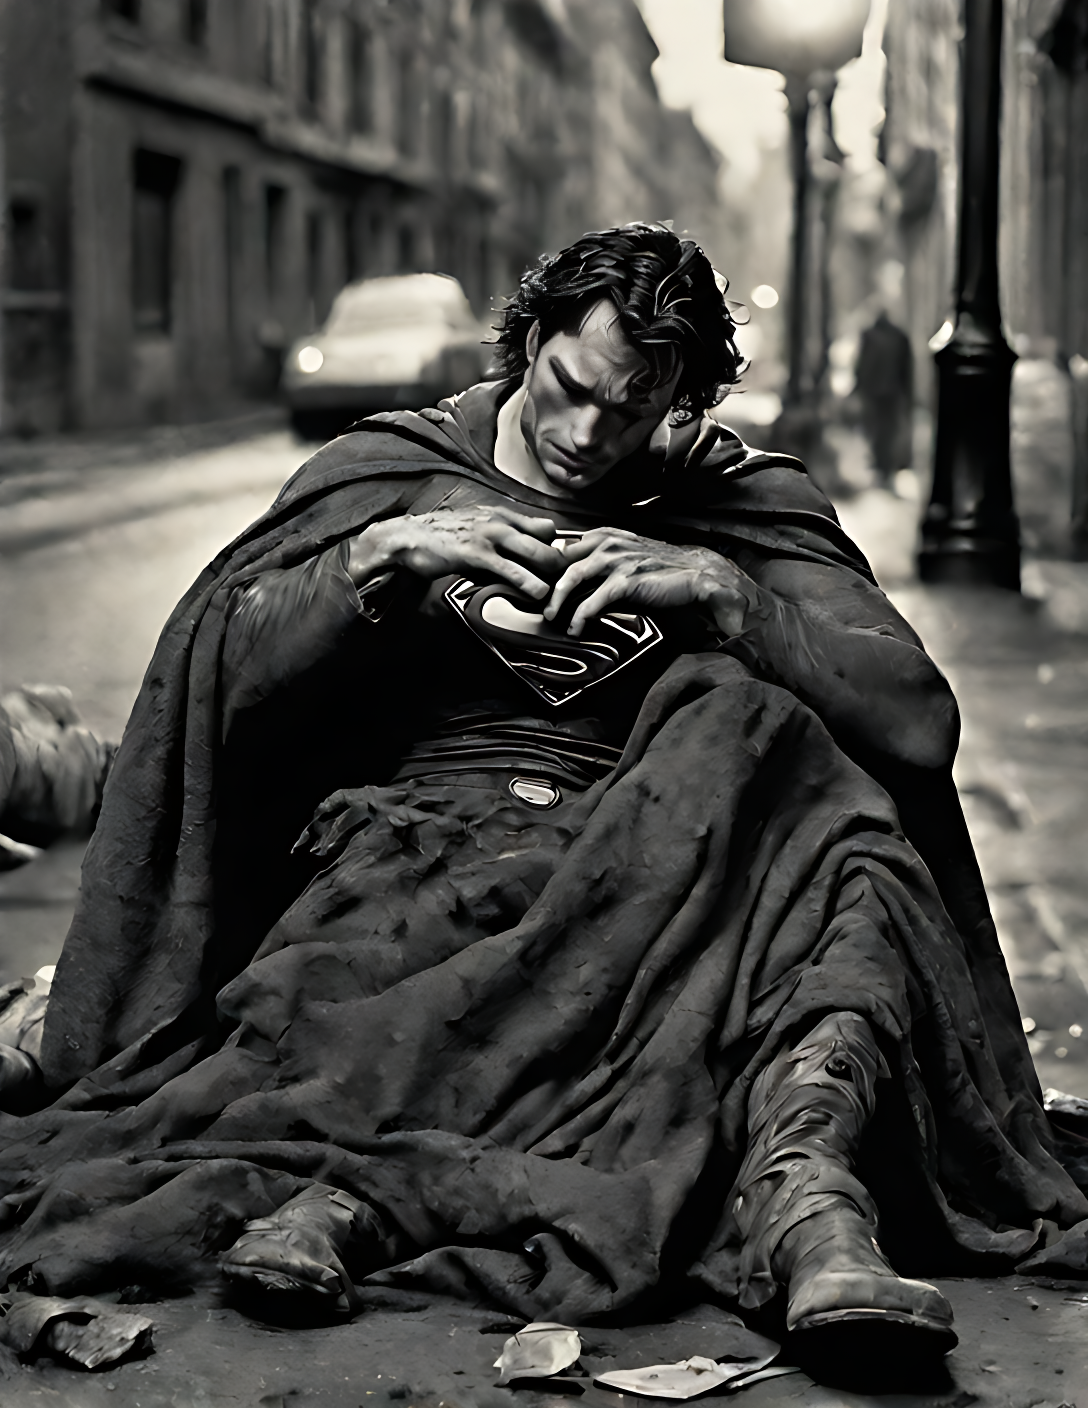 Superman as a beggar sleeping lying on the sidewalk superman dirty and disheveled superman with  334861548